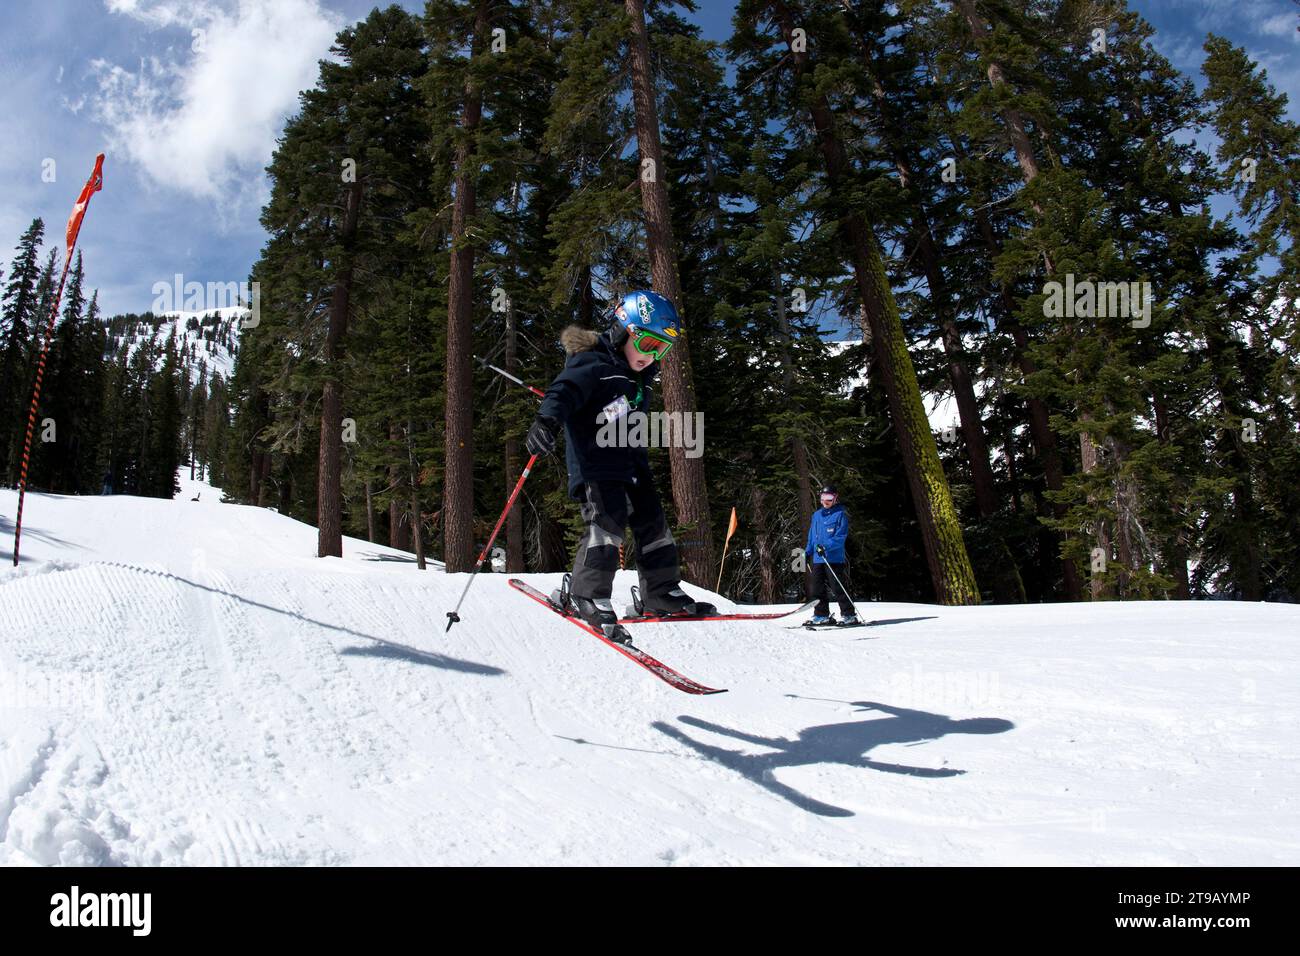 Young skier jumping in a terrain park while his instructor looks on. Stock Photo